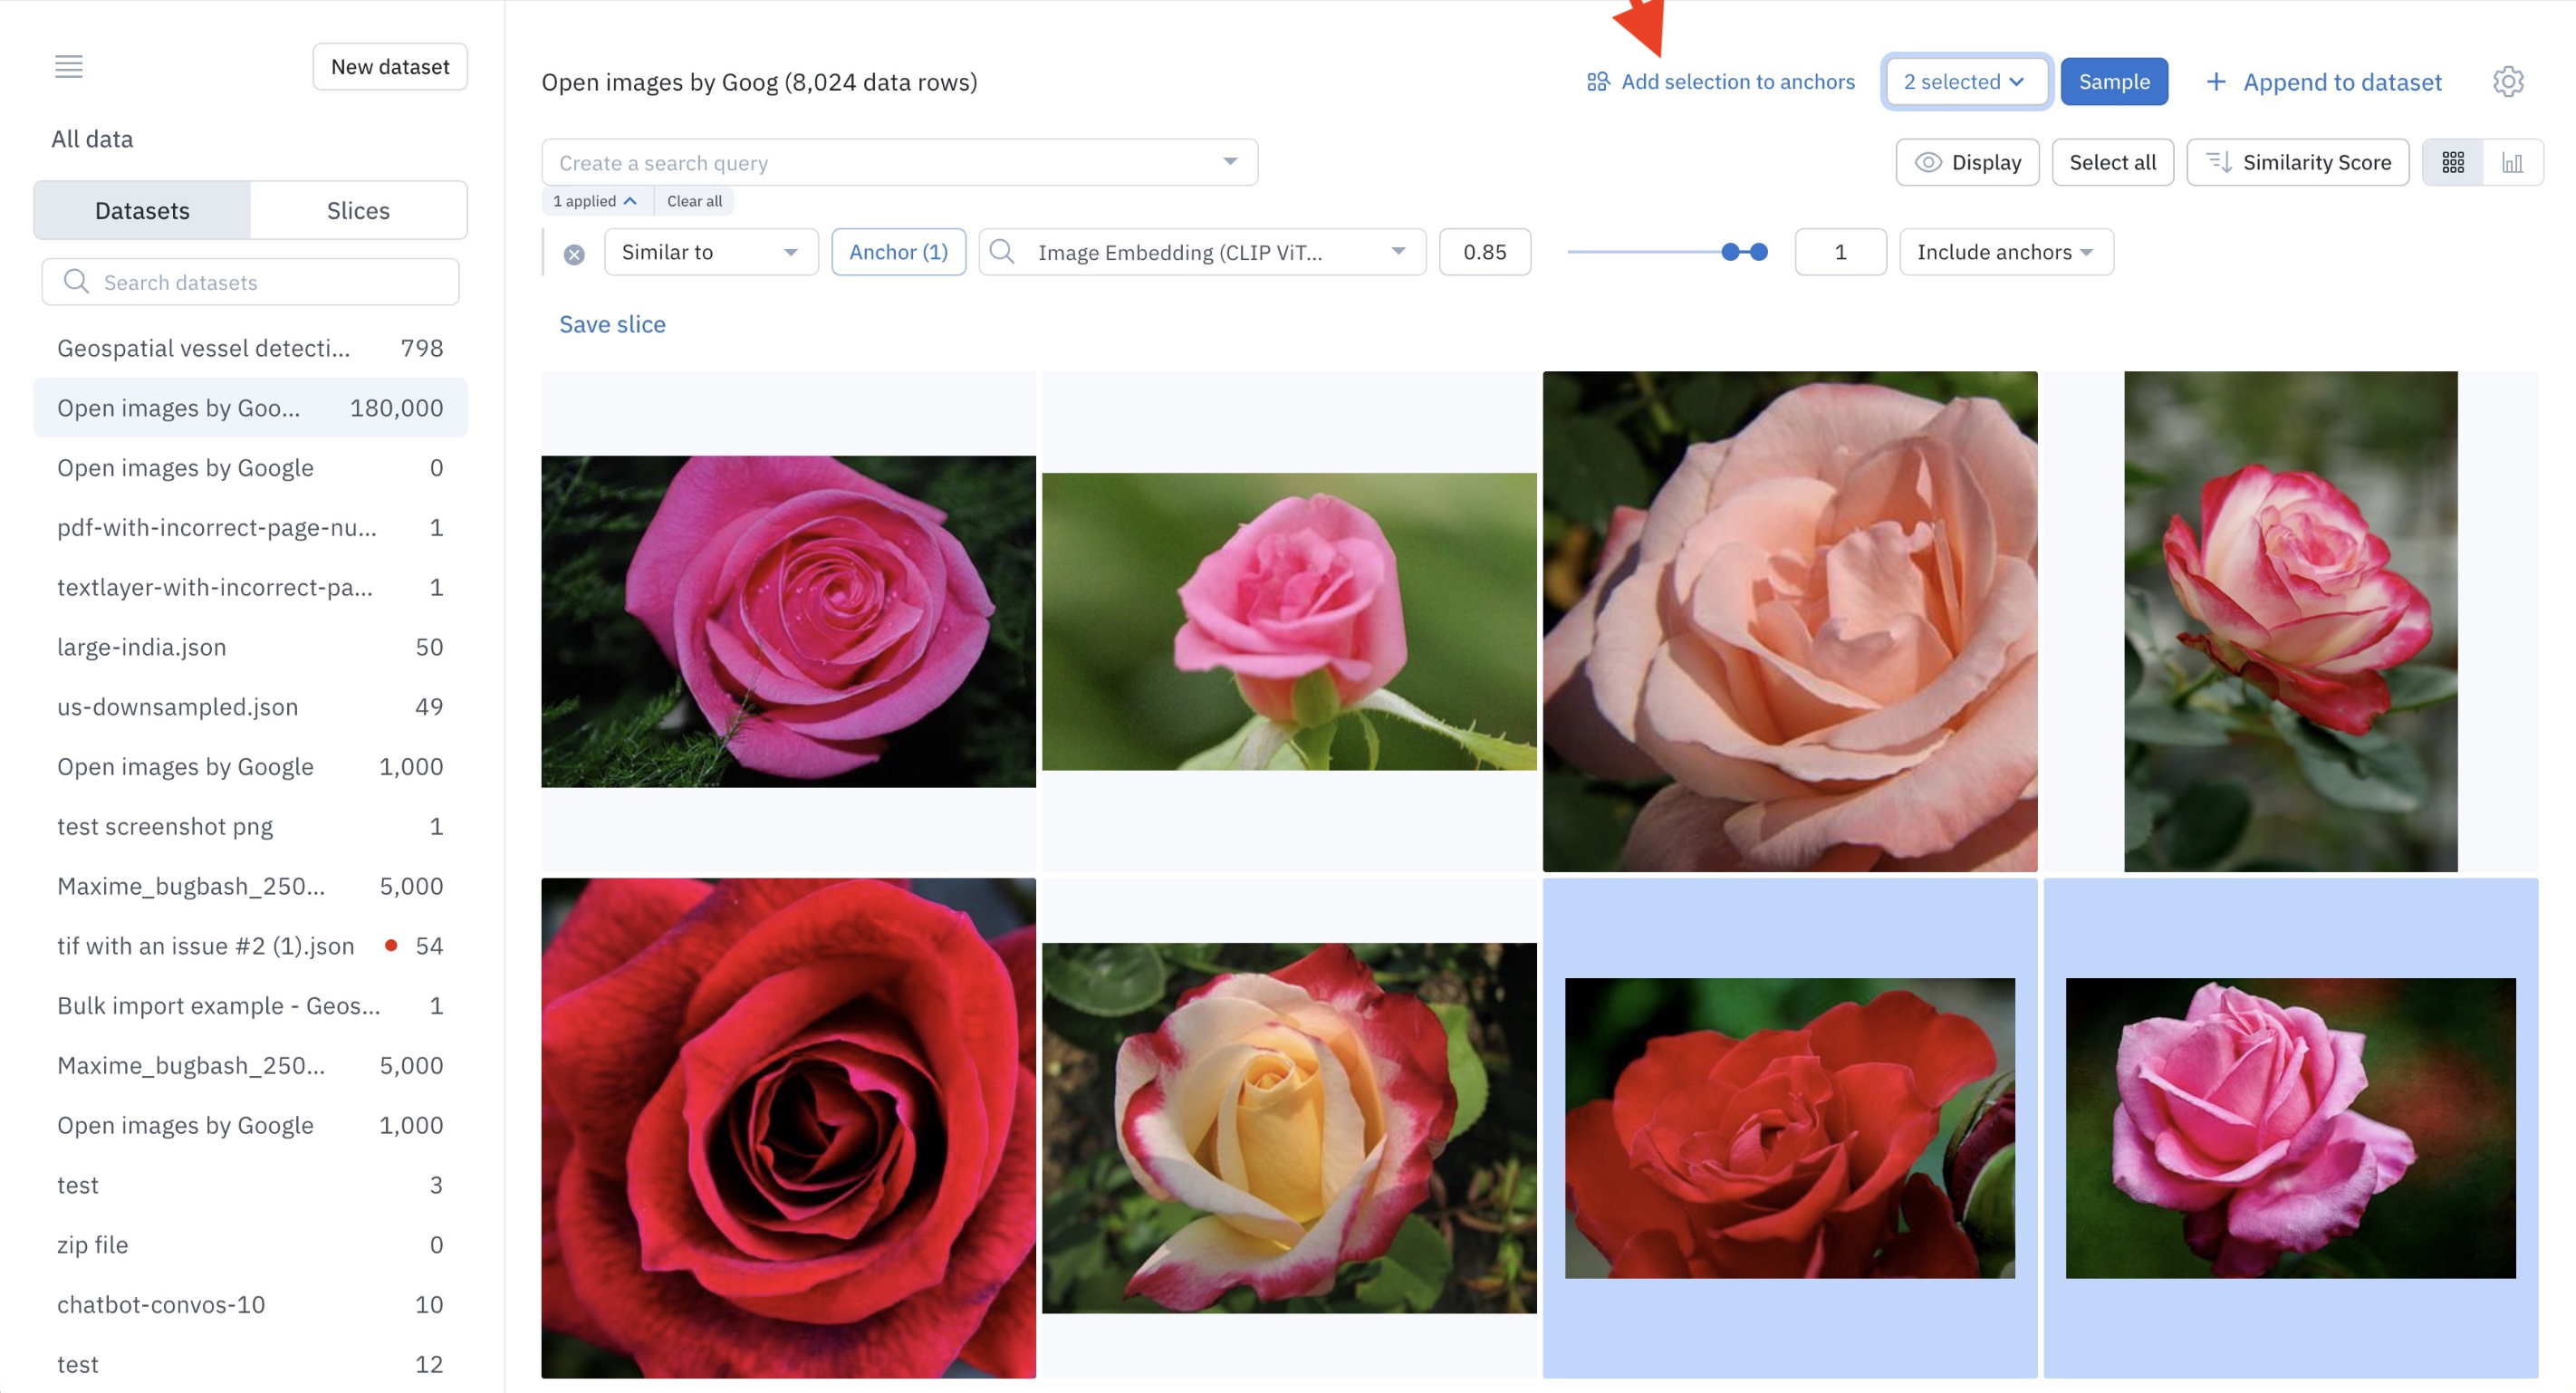 Add selected images as anchors to refine your similarity search